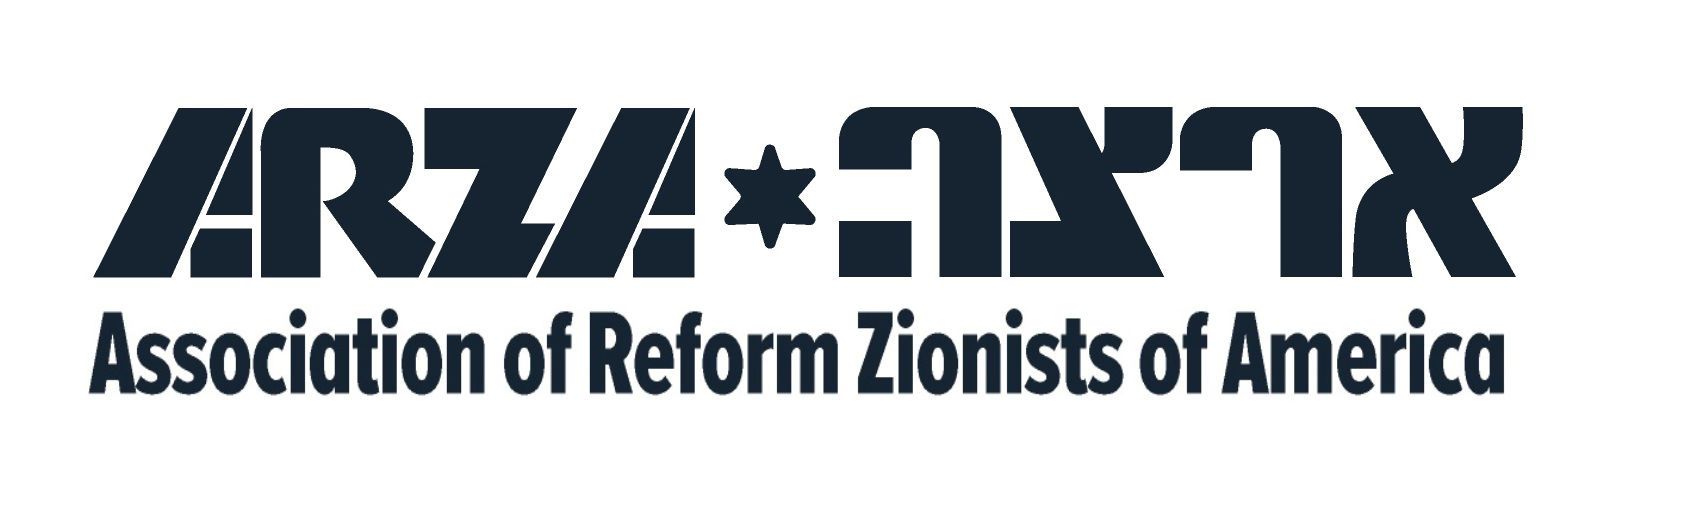 Association of Reform Zionists of America